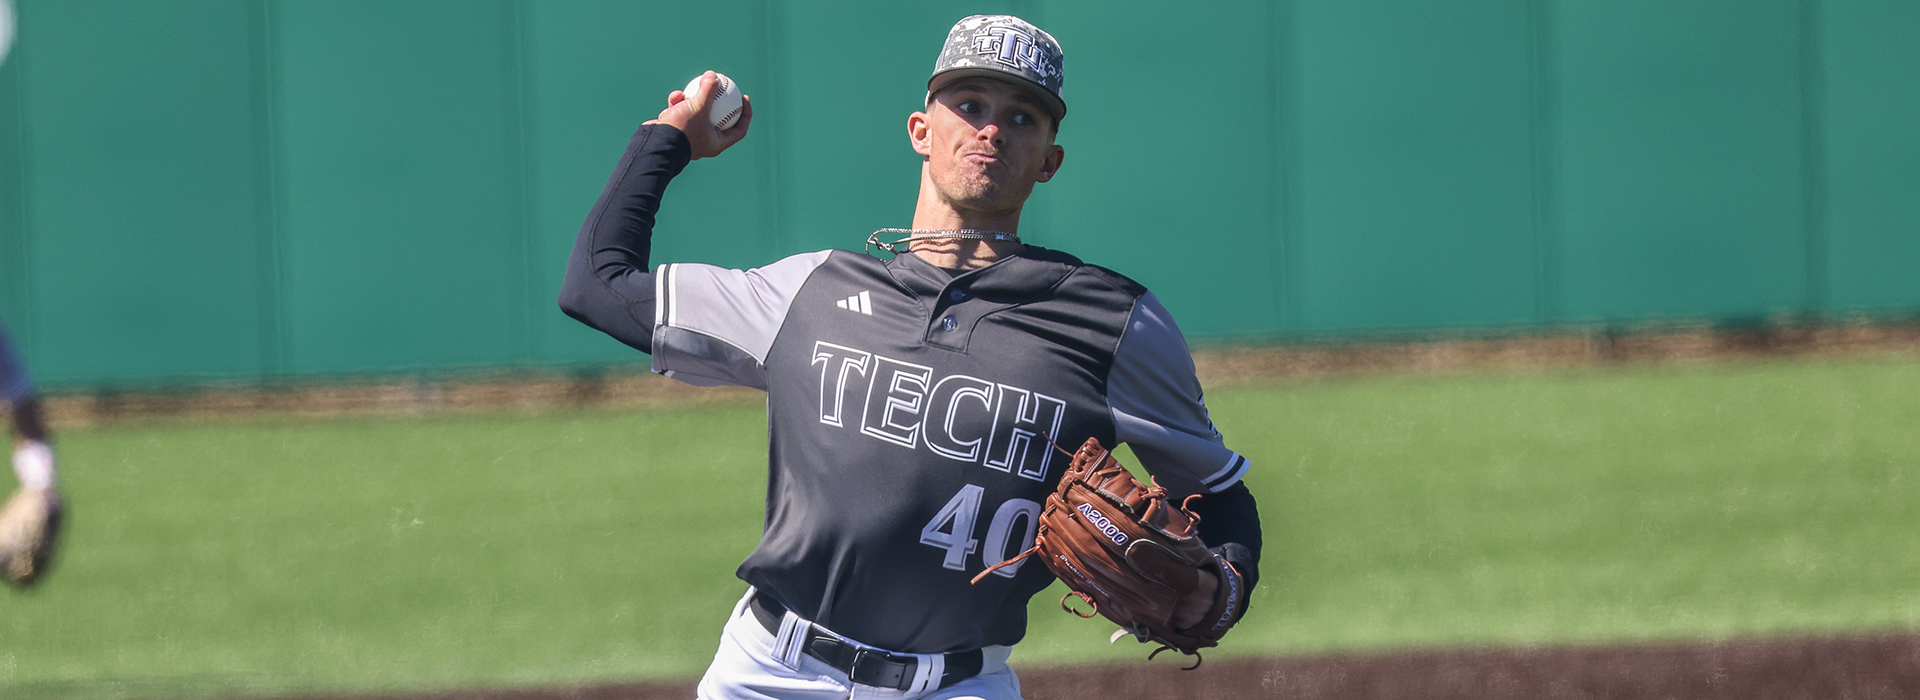 Timely home runs support Pease gem in clutch Tech win over SEMO